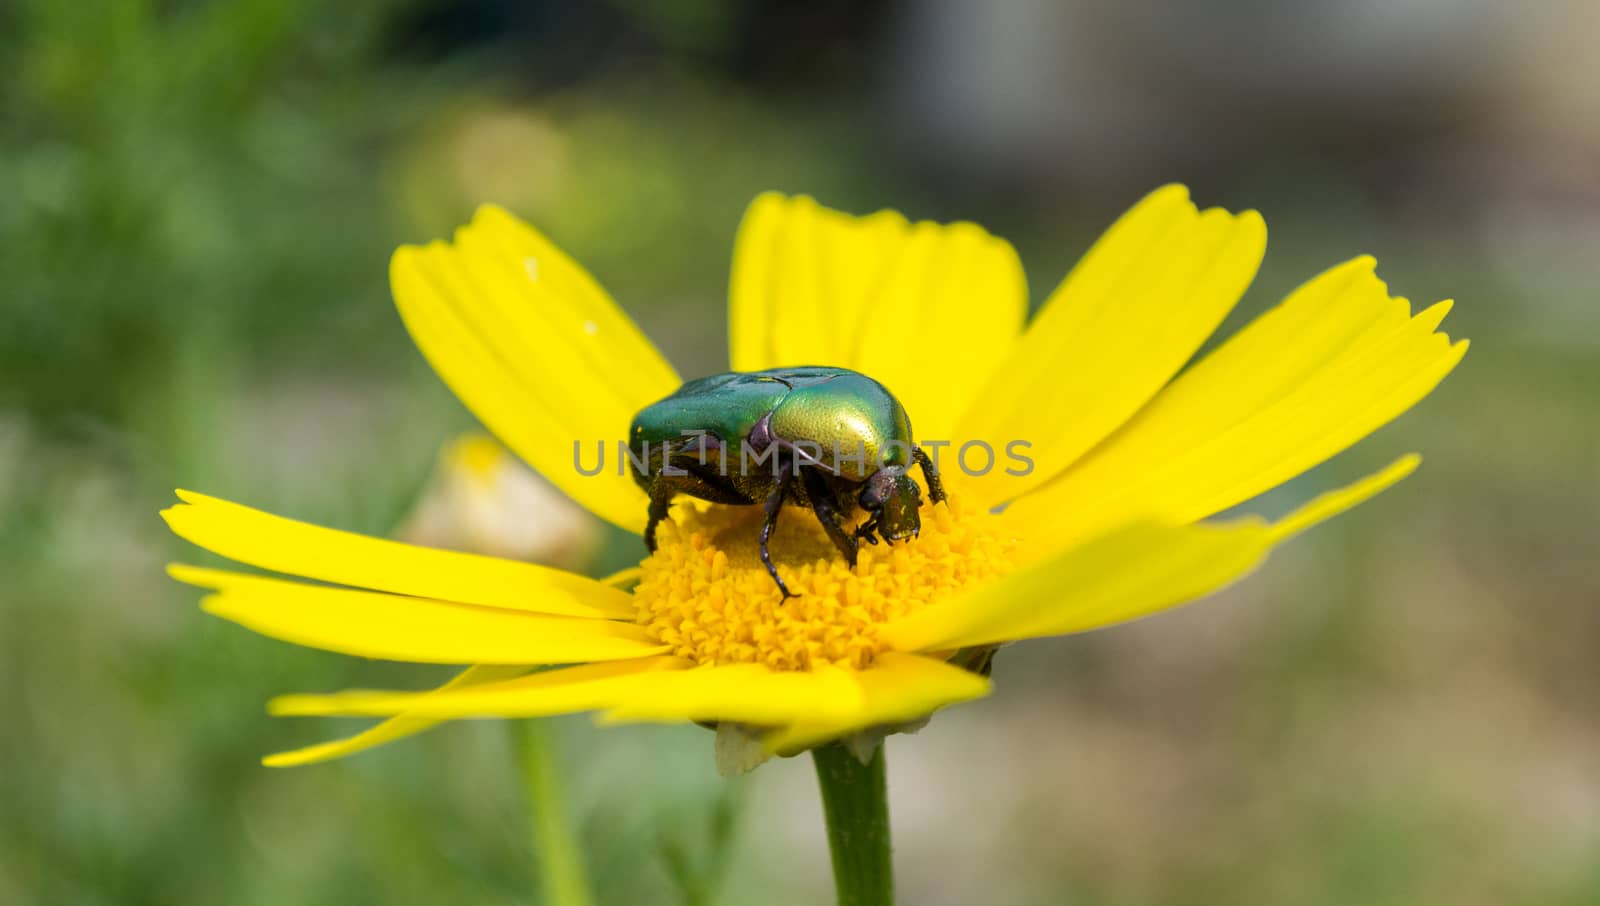 Green beetle on a yellow flower by tomypety